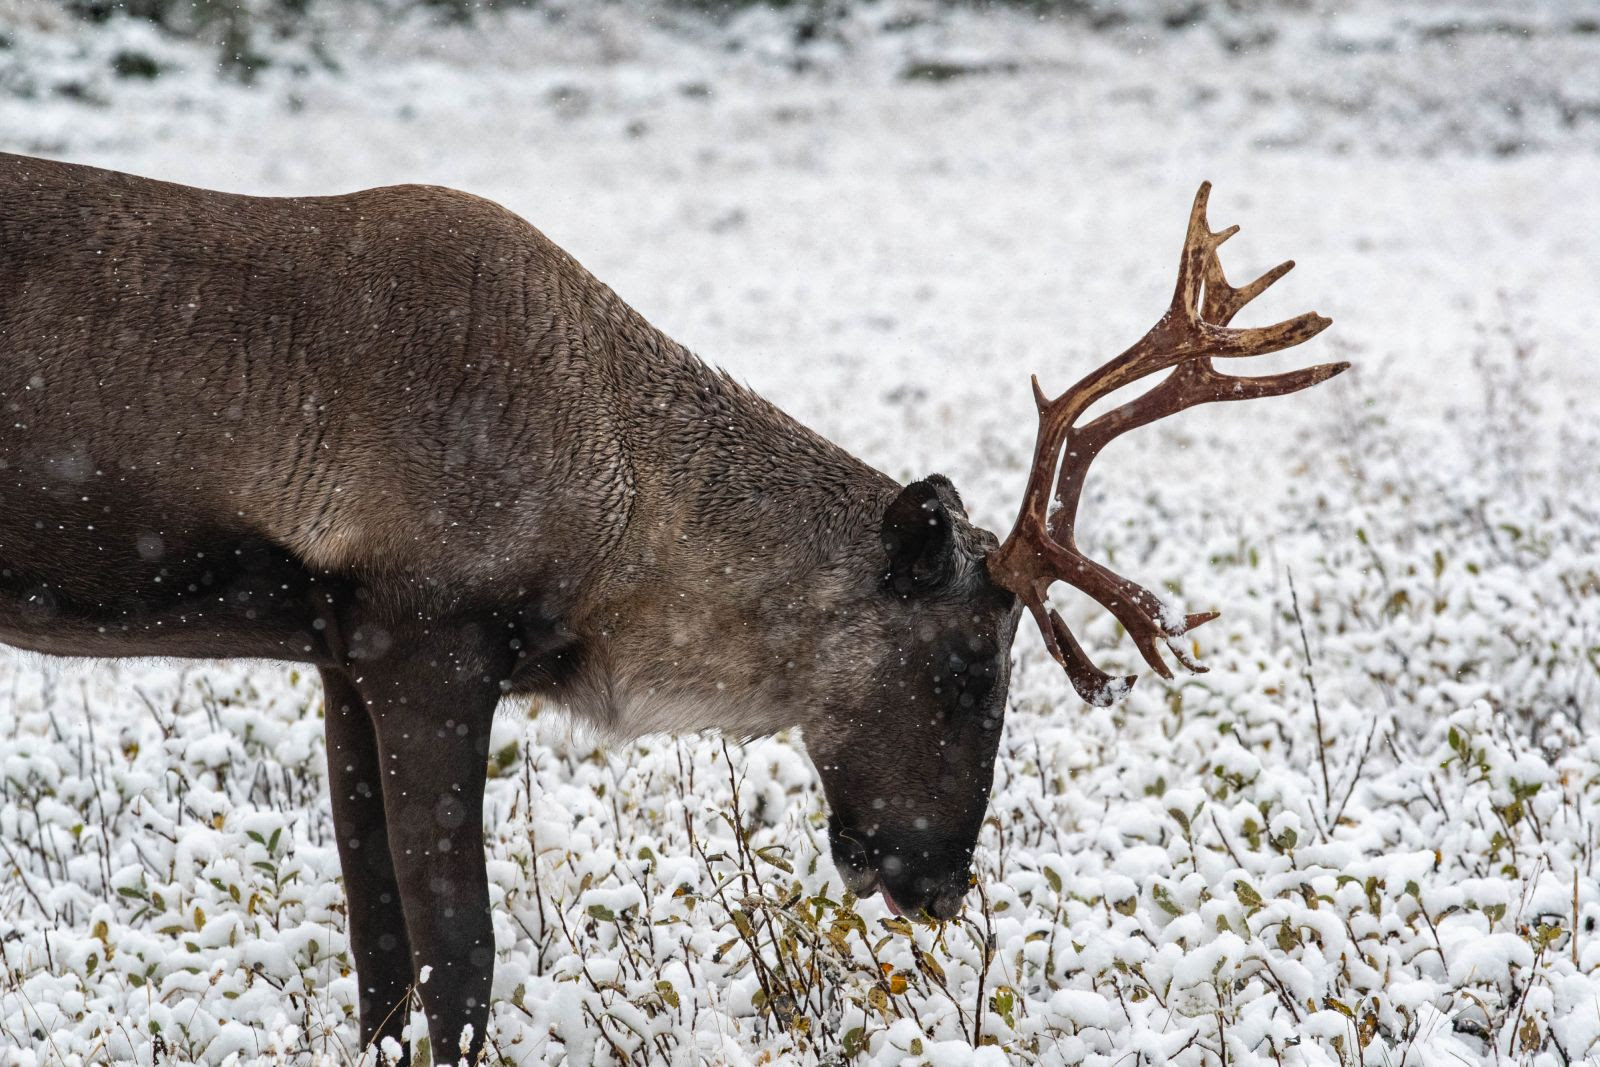 A woodland caribou is shown in profile eating a small shrub among a snowy backdrop. 